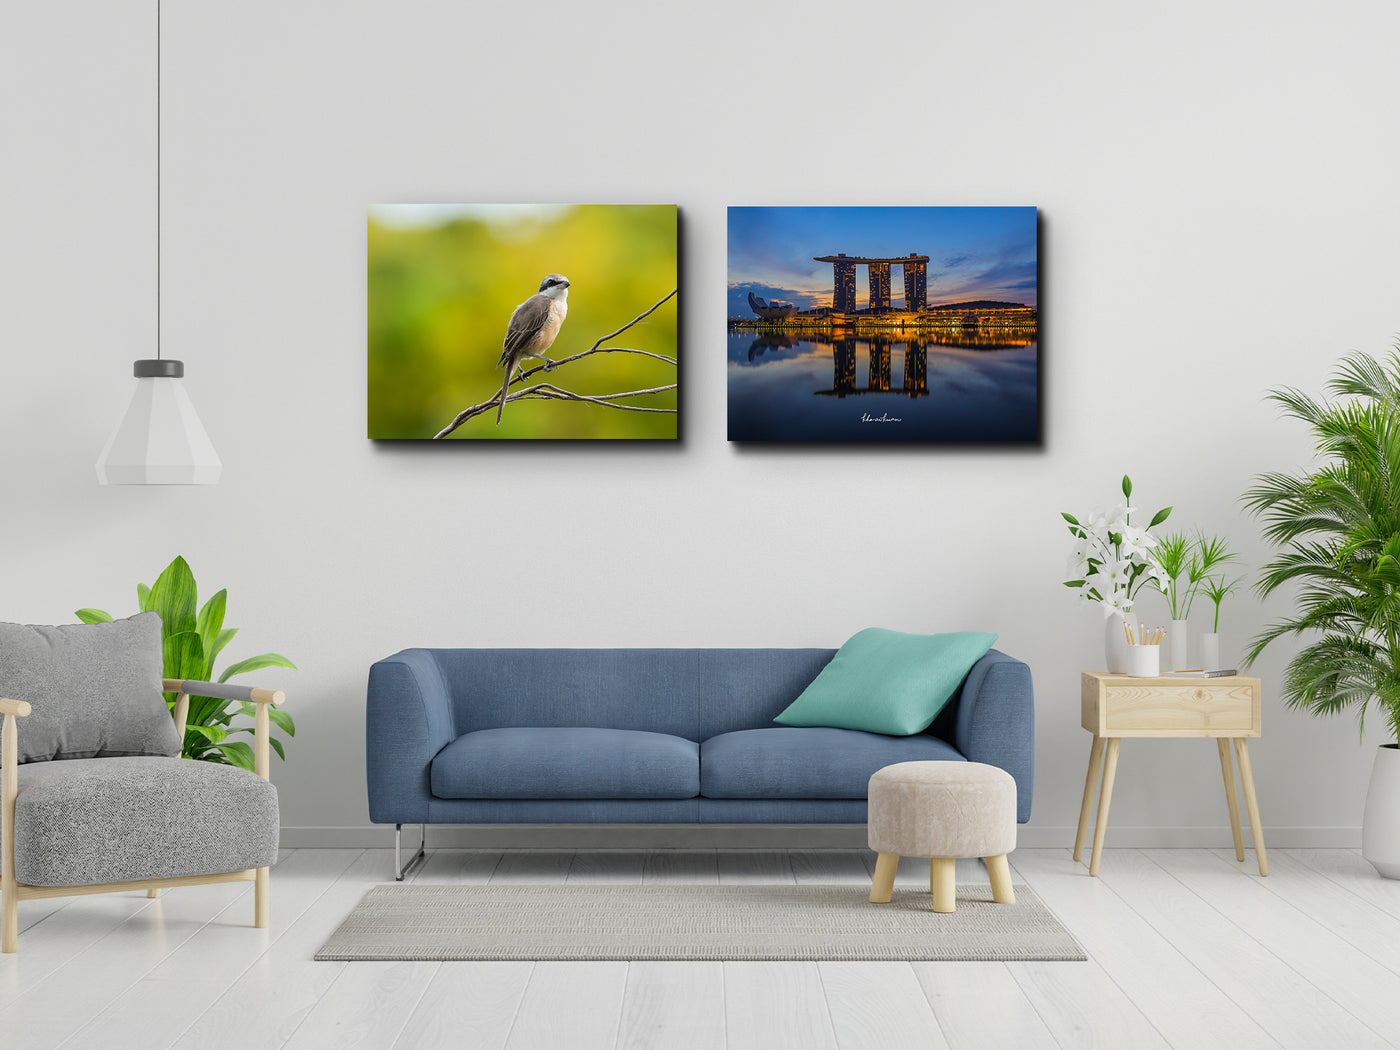 Brown Shrike at Garden By the Bay (Canvas Prints)